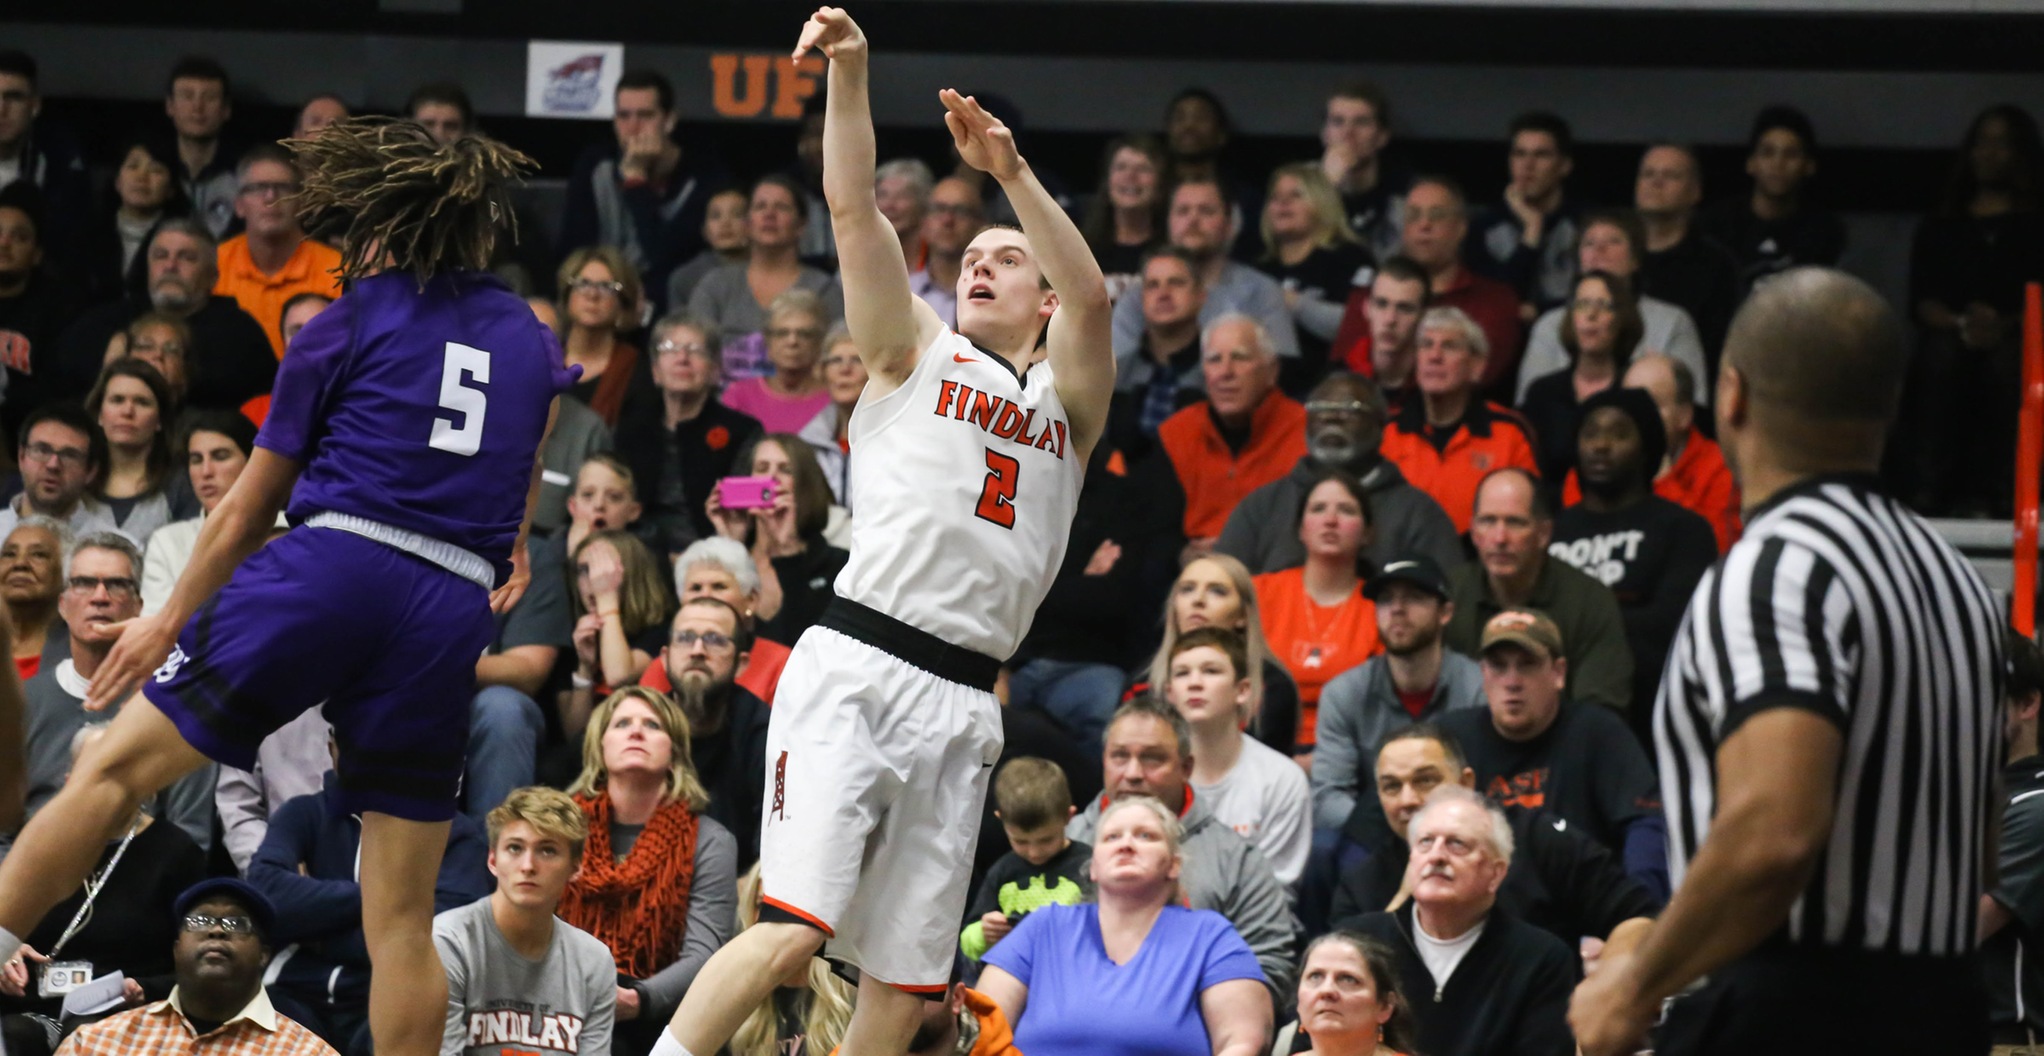 #13 Oilers Face Drury in 1st Round